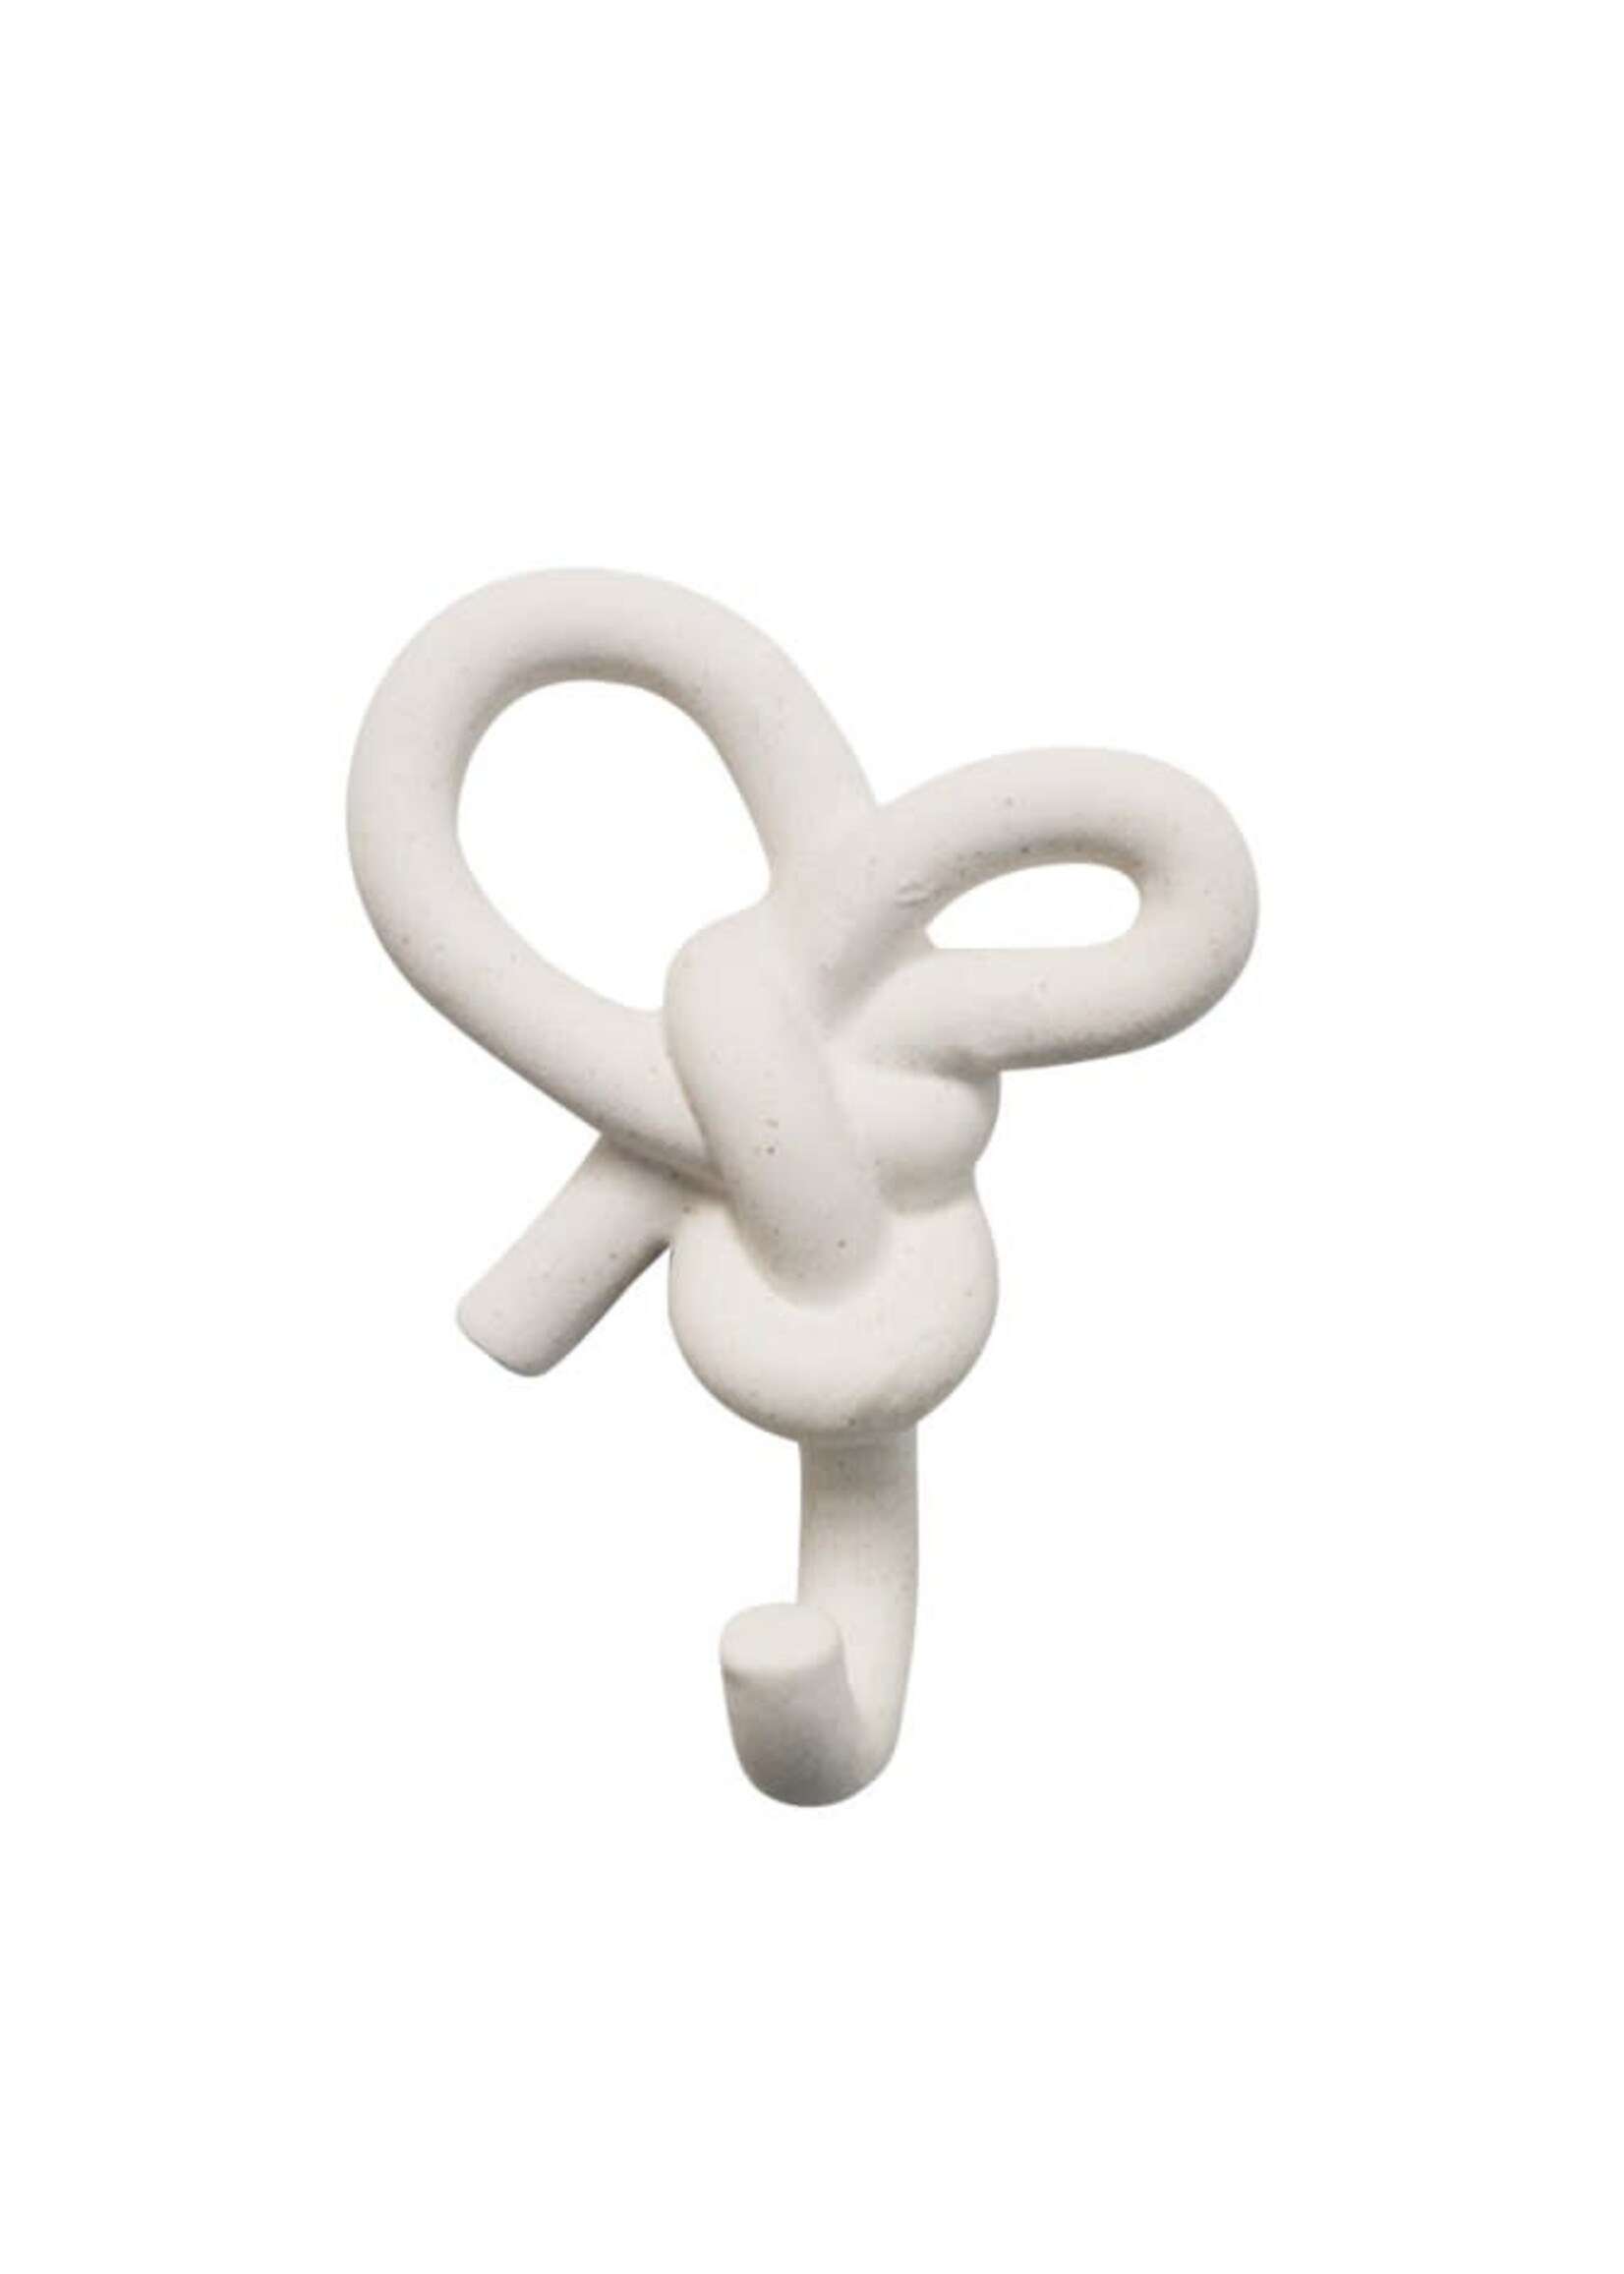 Hook Knot White